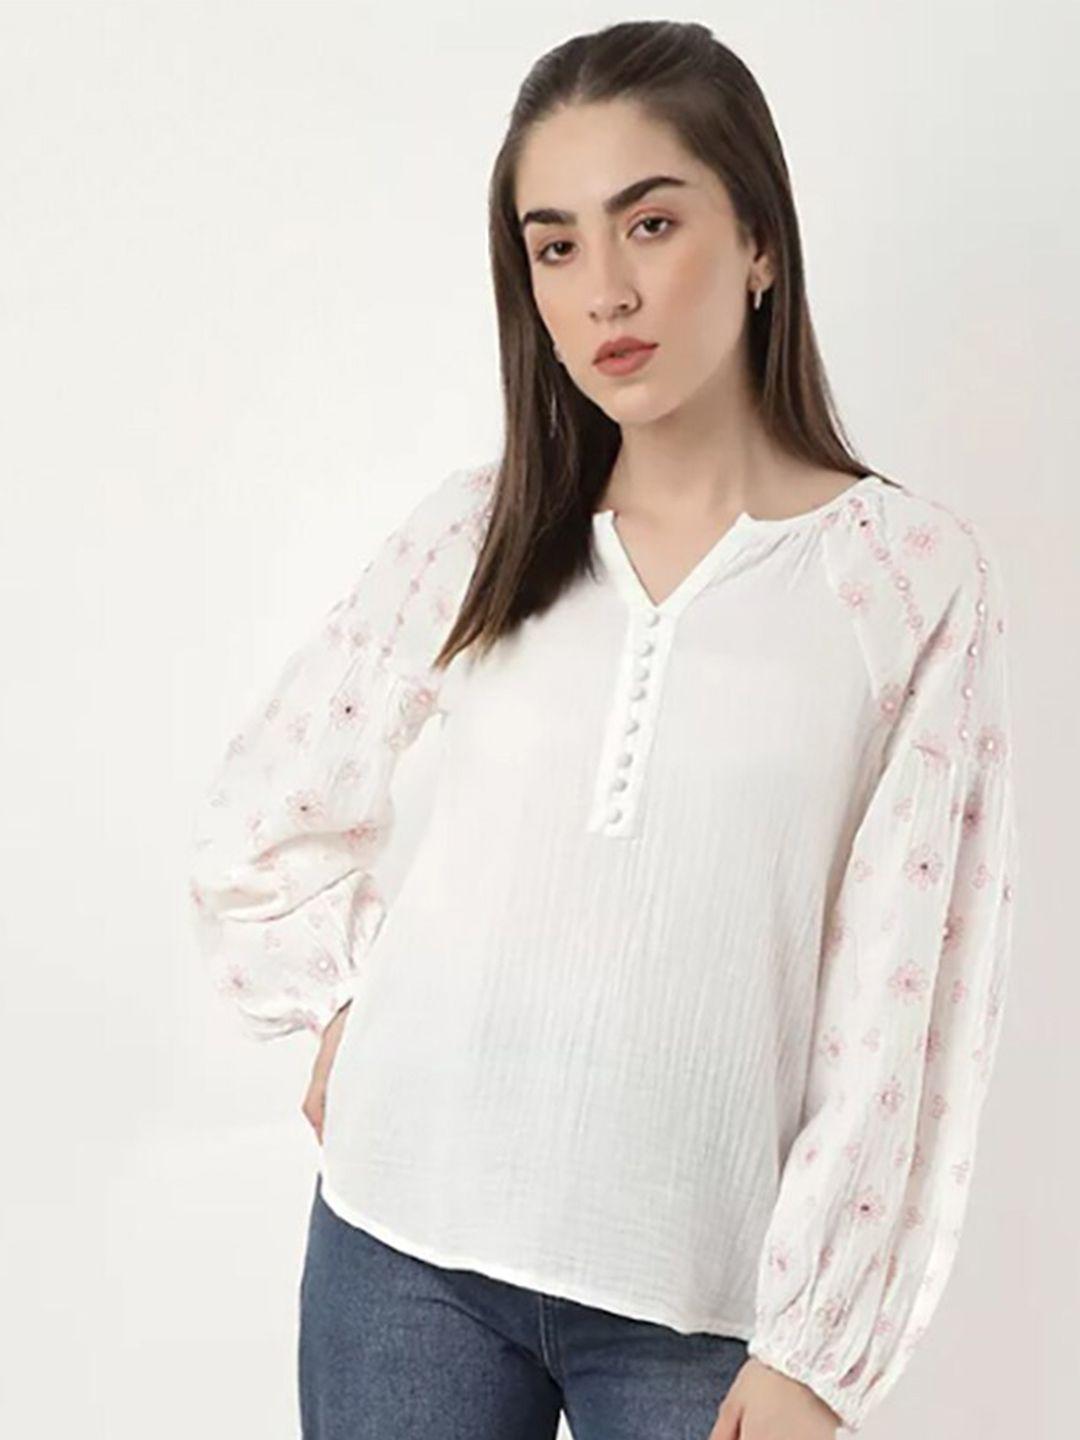 marks & spencer white & pastel parchment floral top